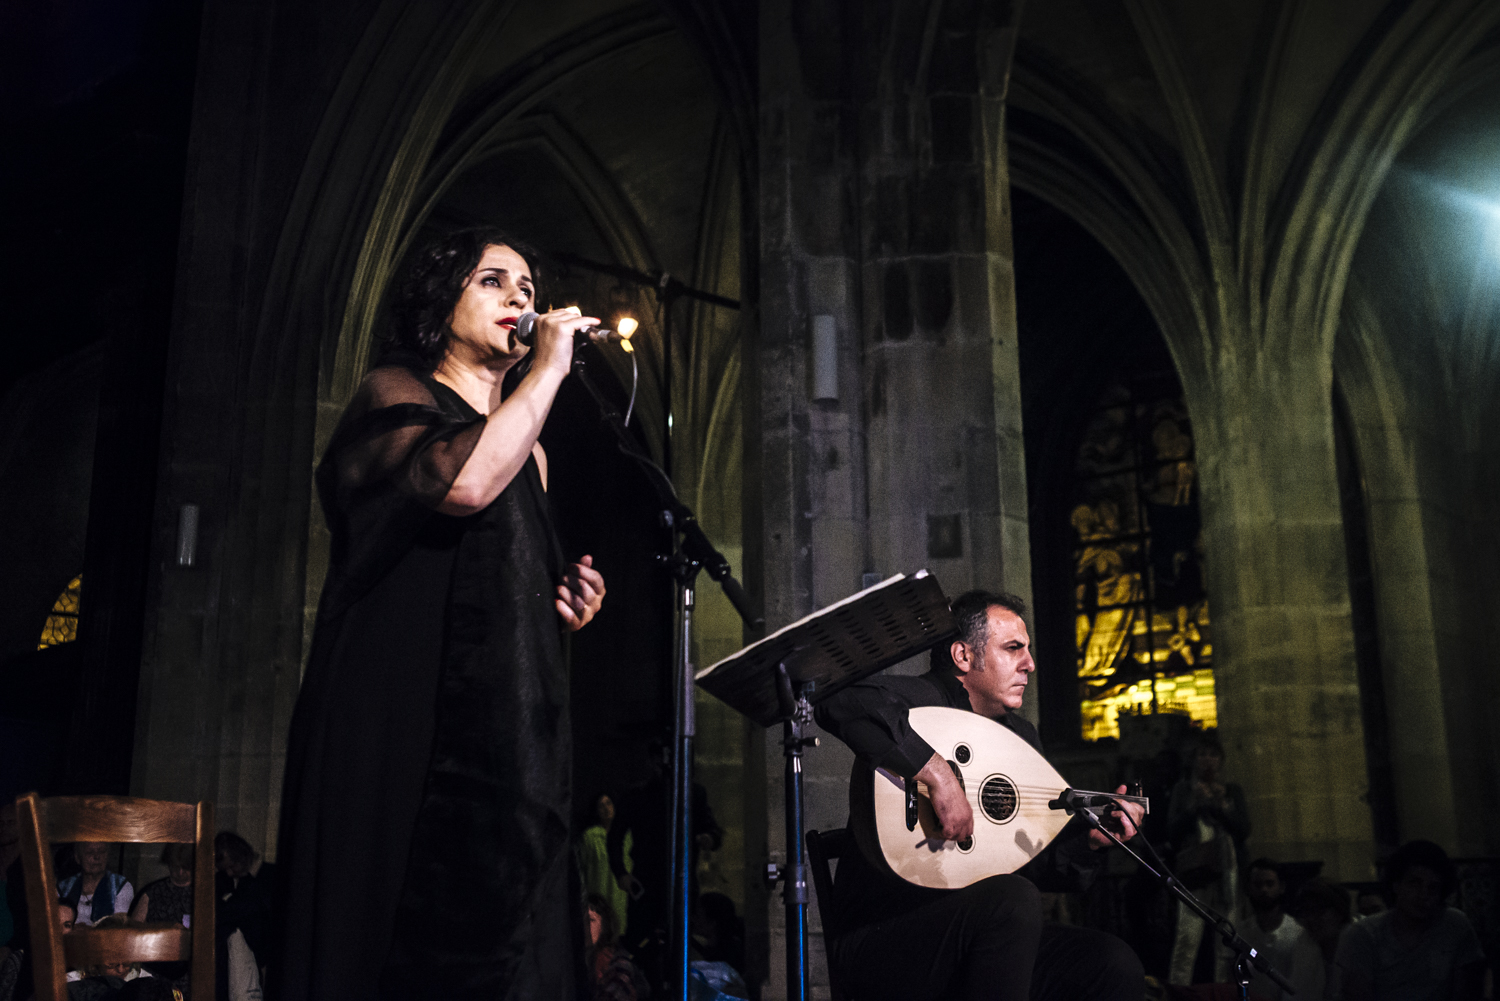 Syrian opera and lyric singer Noma Omran and oud player Mohannad Al Garamani perform during the "Nuit Sacree" on 4 June 2017 (photo: Jan Schmidt-Whitley / Le Pictorium)